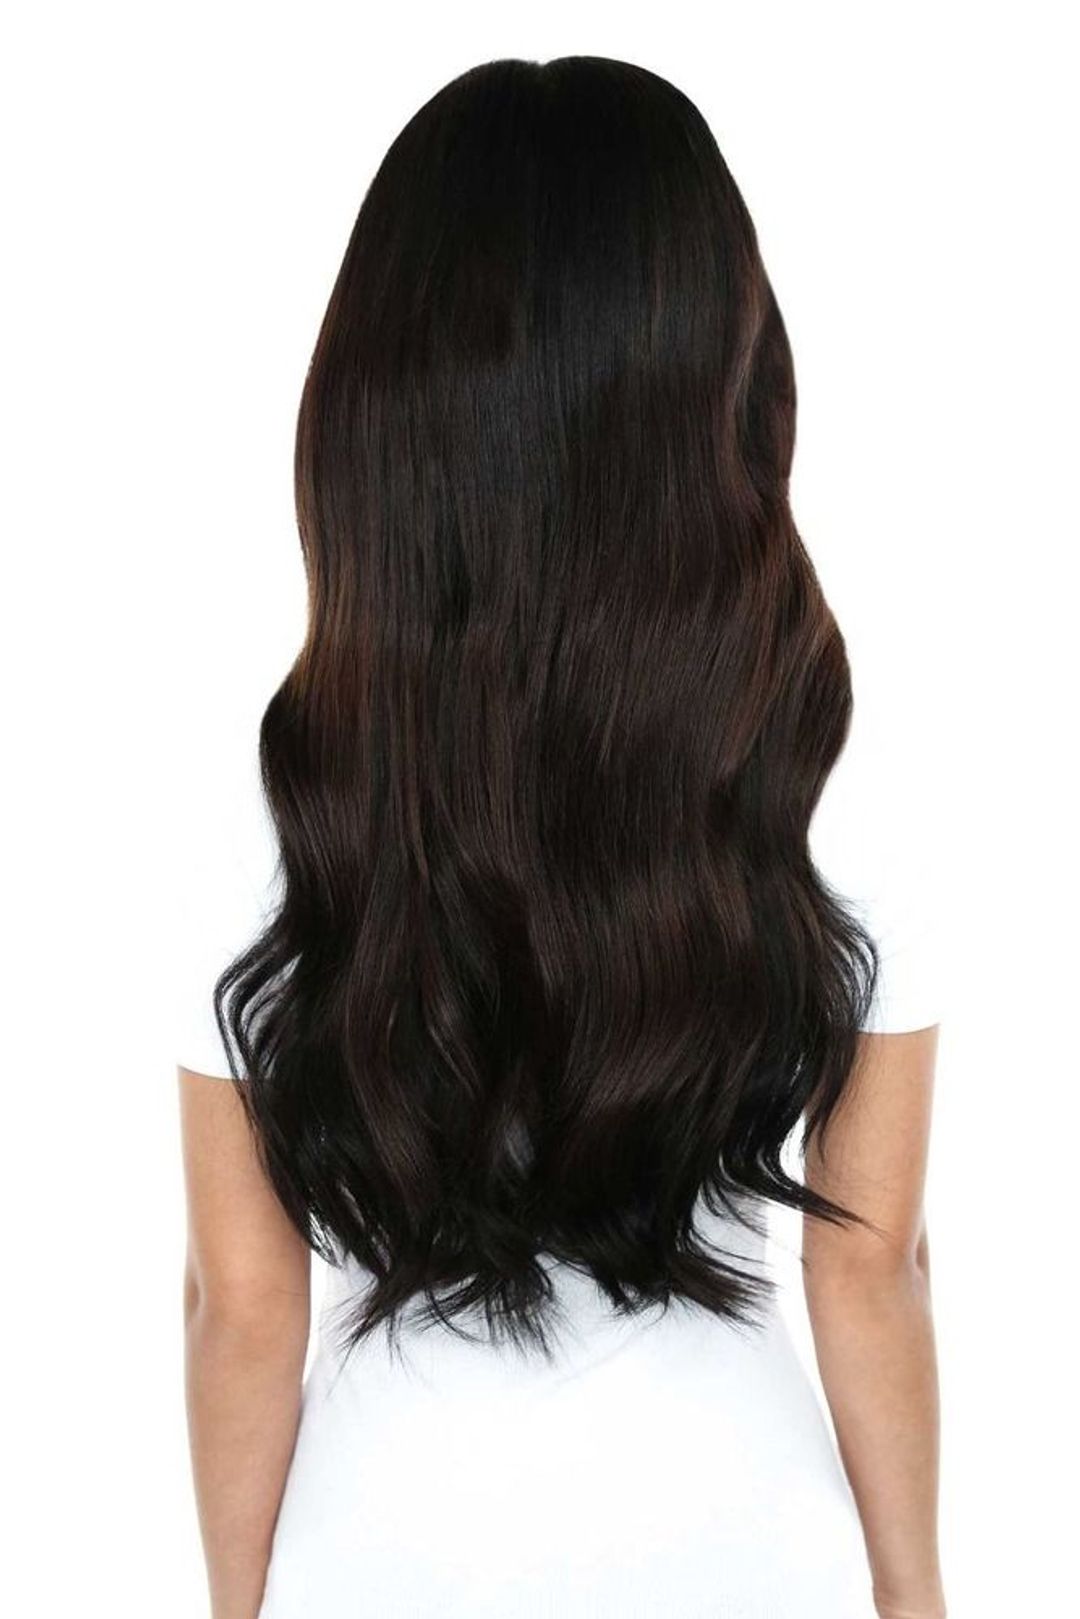 Beauty Works Gold Double Weft Extensions - Natural Black,20"